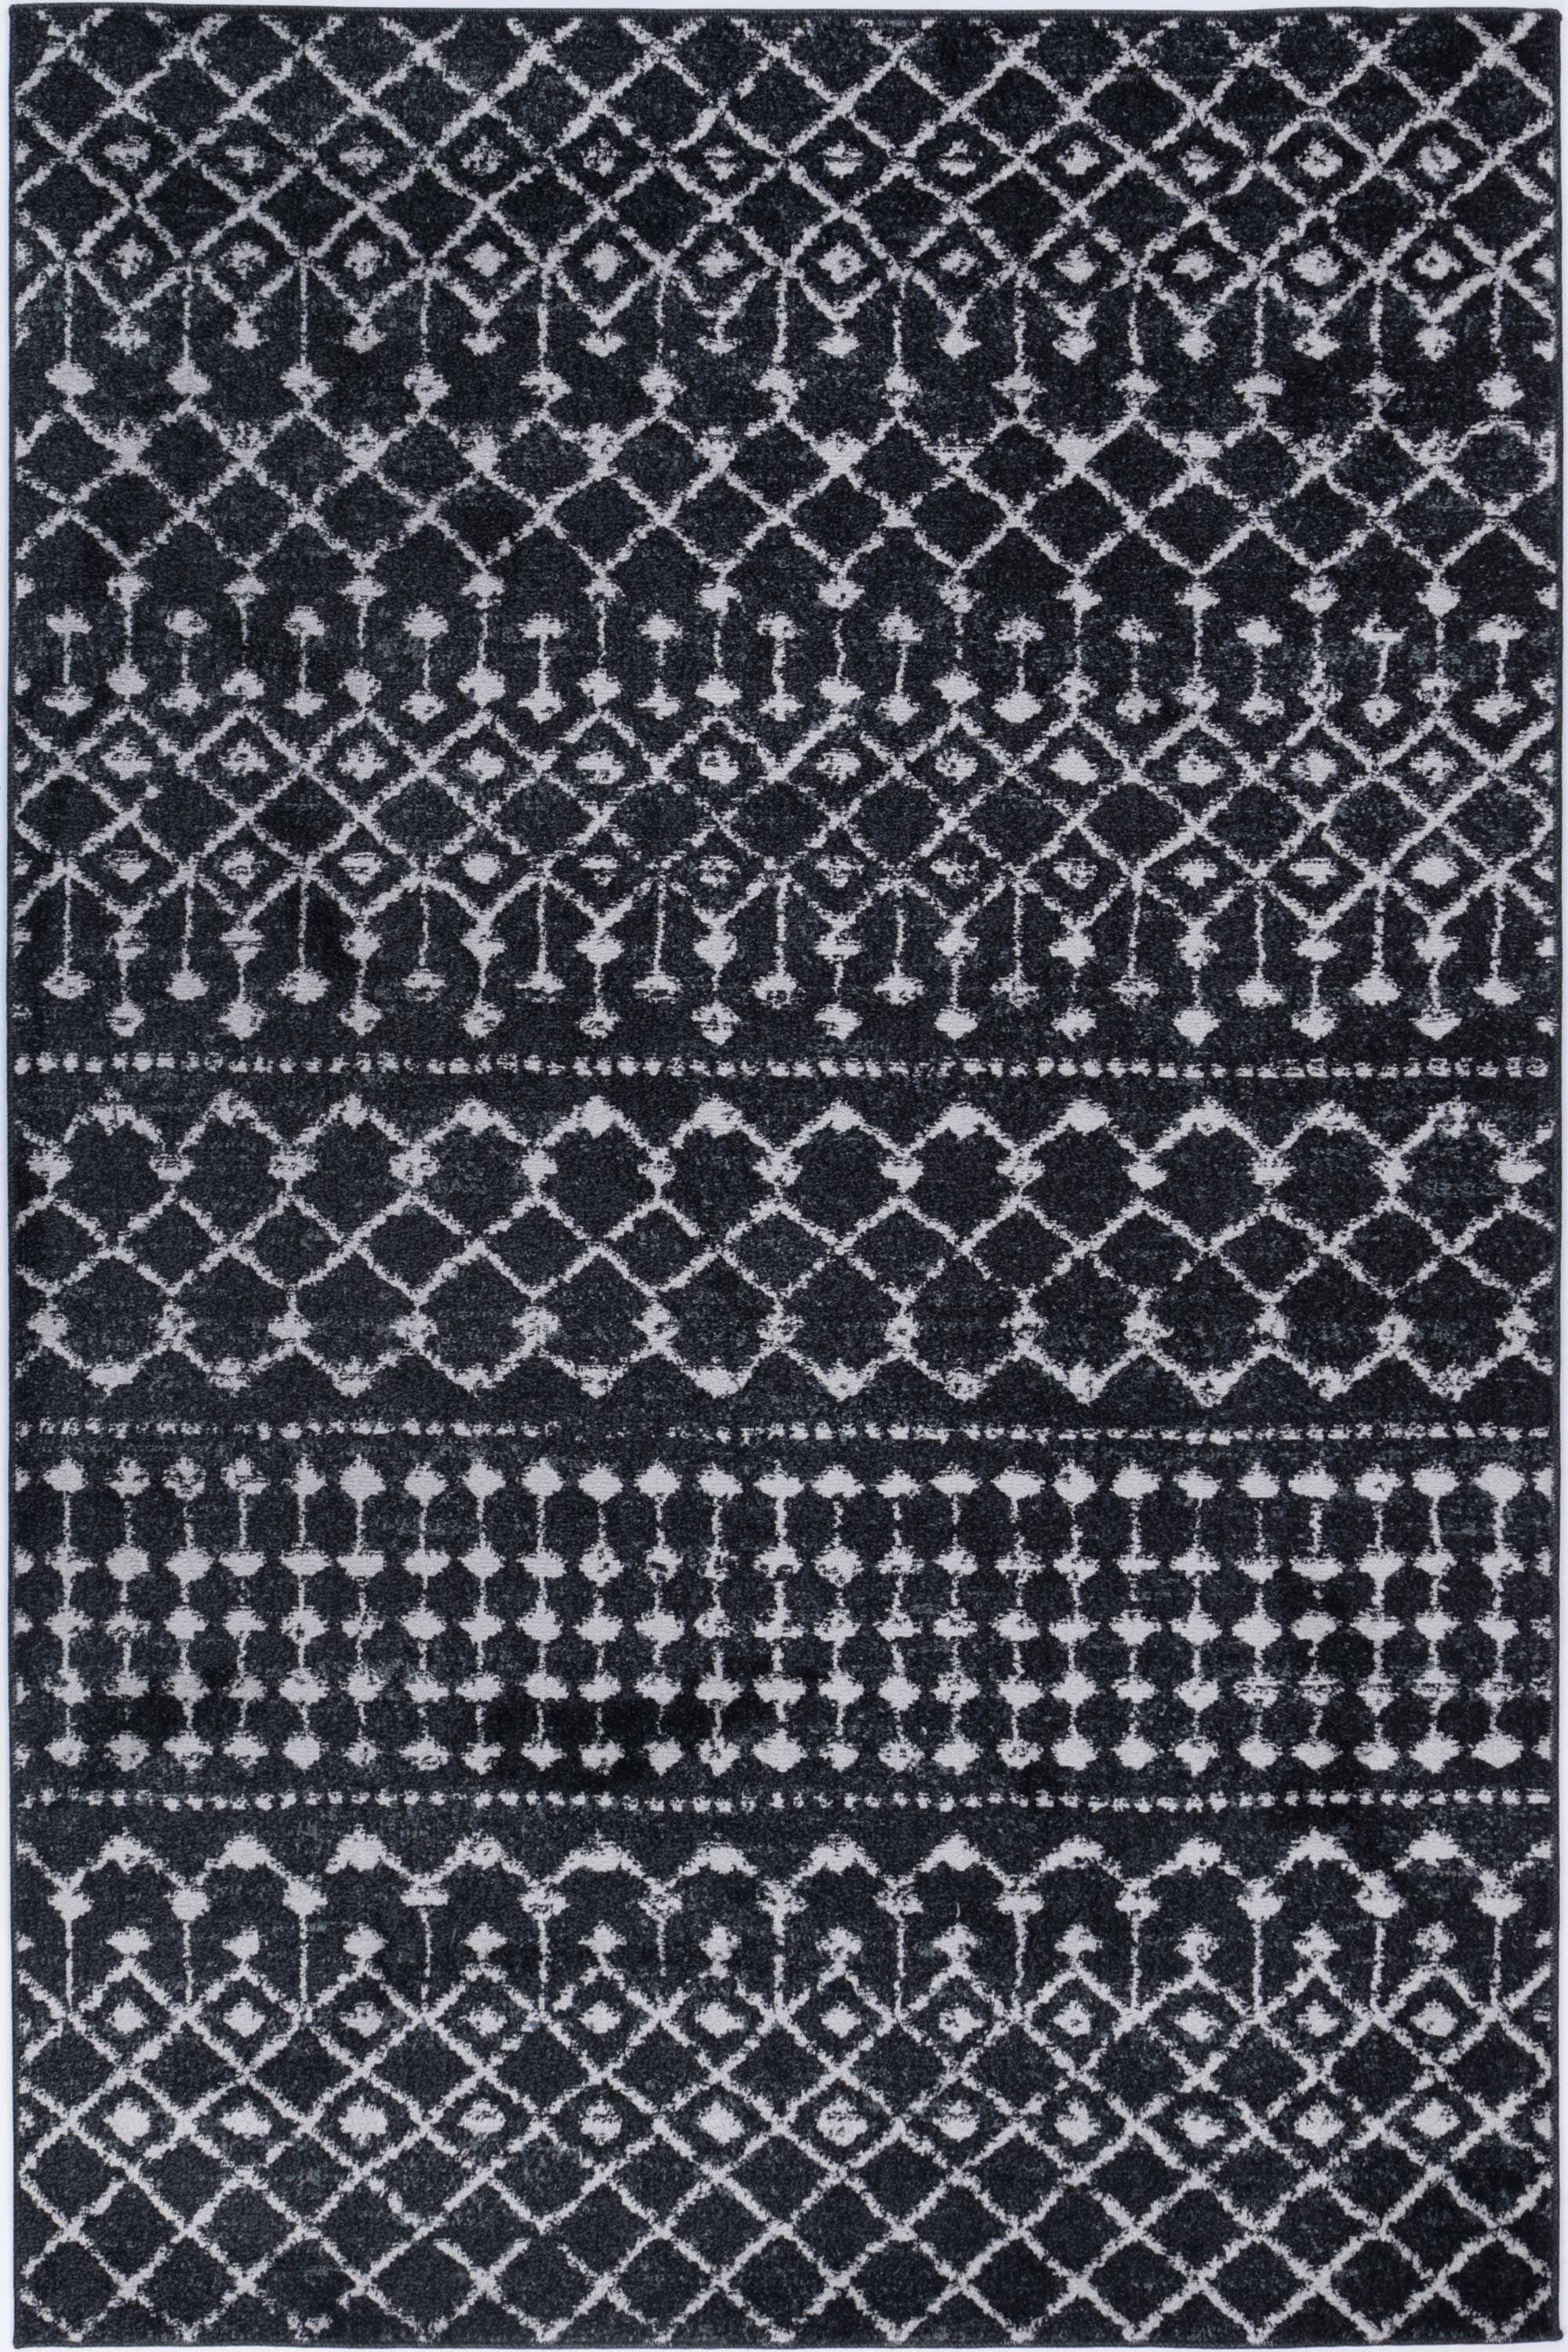 Bergen Repeats Black and White Rug